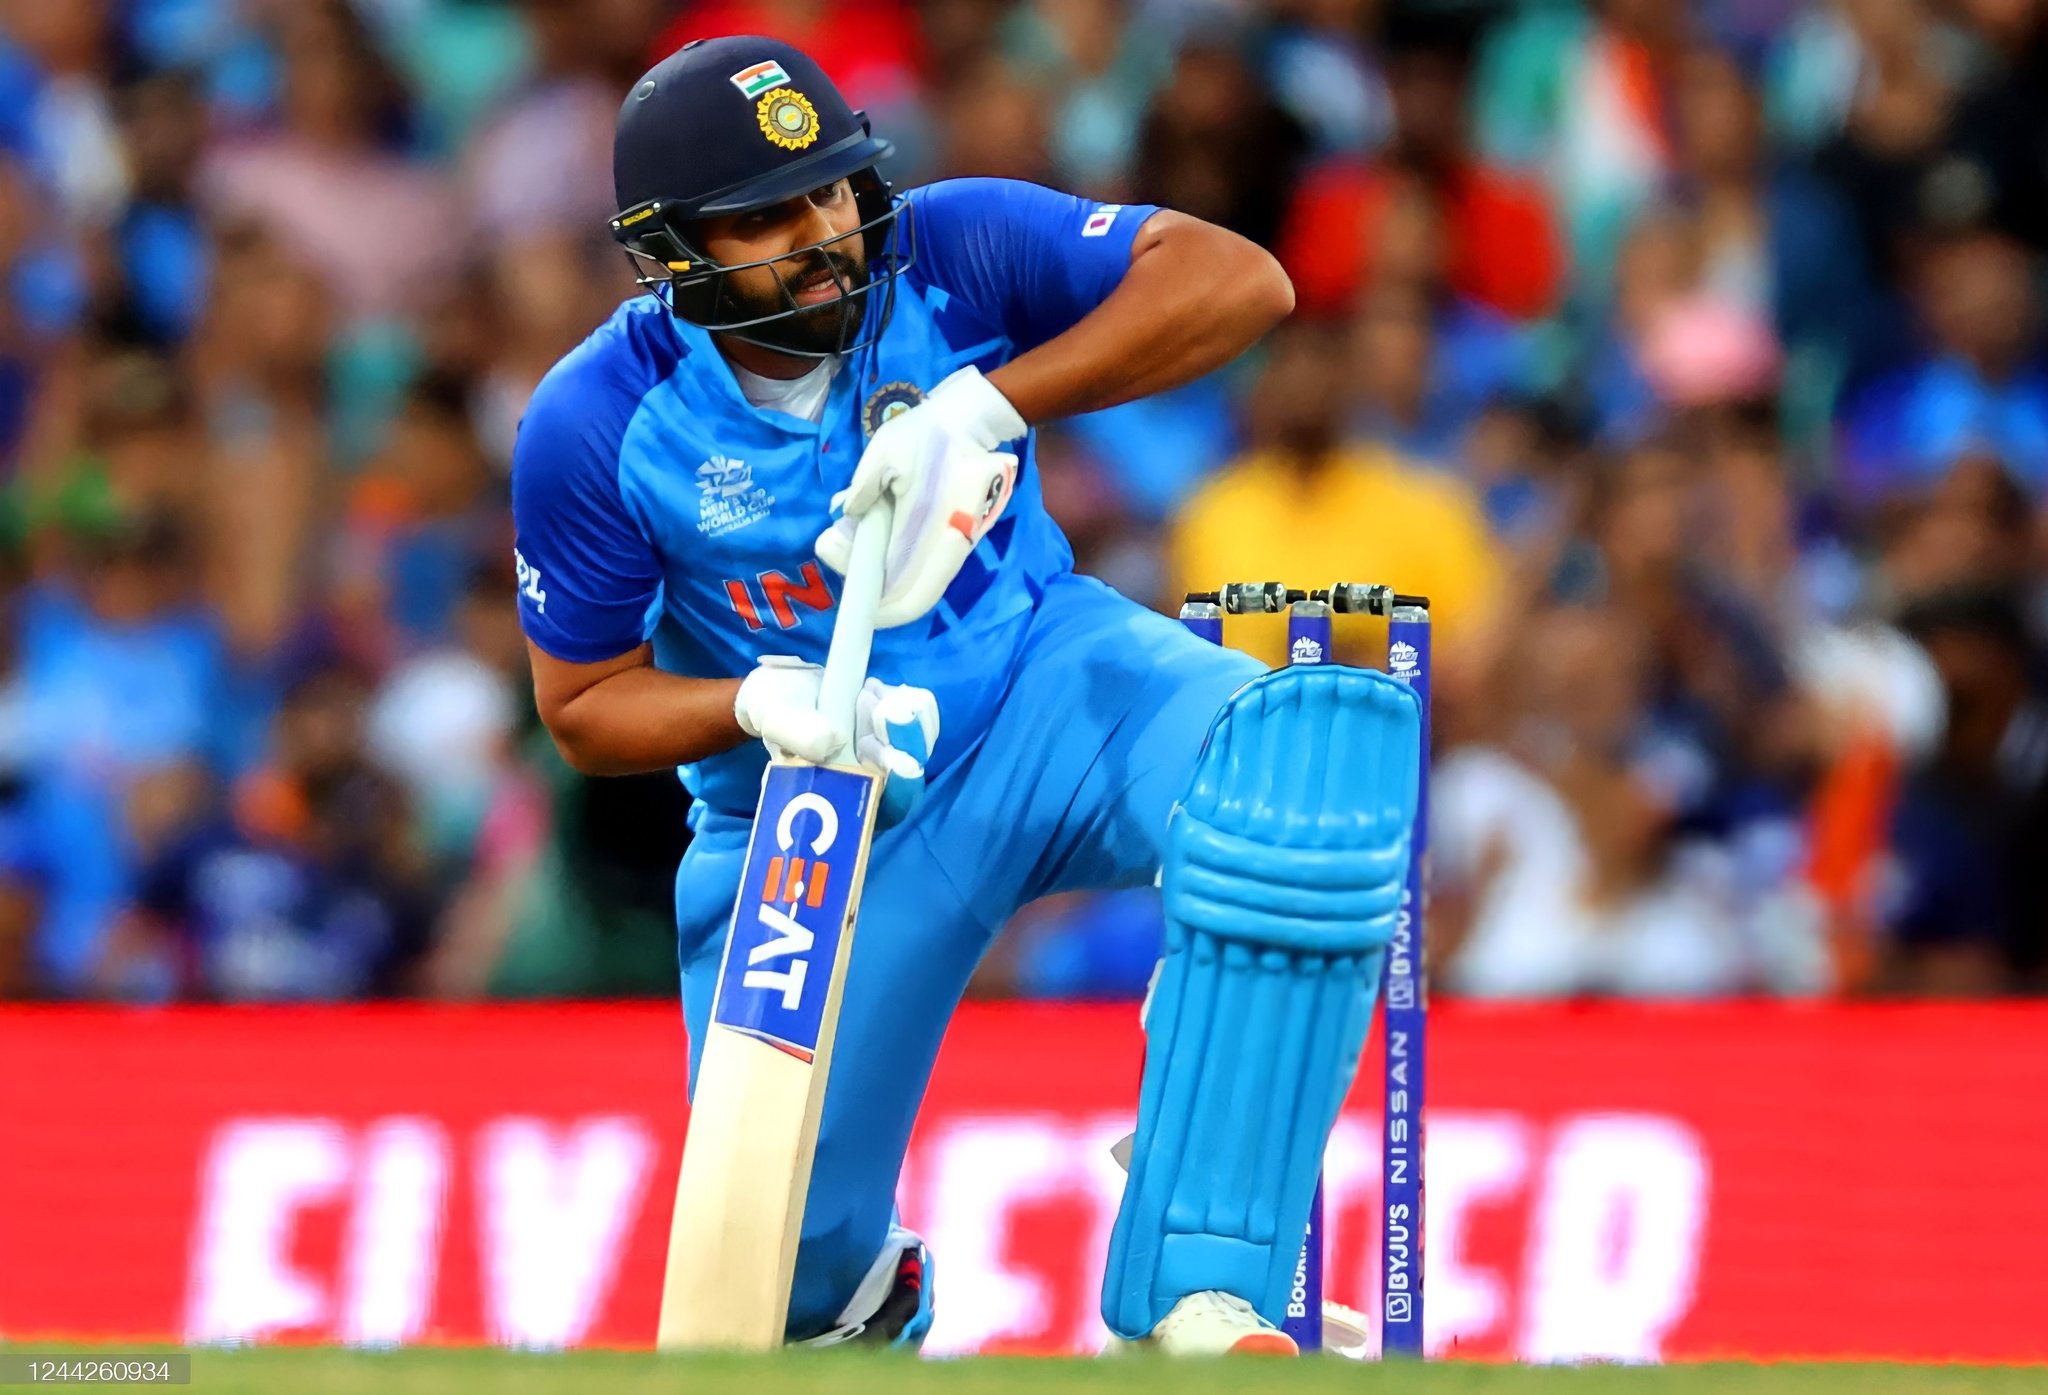 India in T20 WC: What’s wrong with Rohit Sharma form ask fans? Biggest joke on Indian captain ‘even Alia Bhat delivered today, but Rohit can’t’: Check HILARIOUS Online banter & Follow IND vs ZIM LIVE